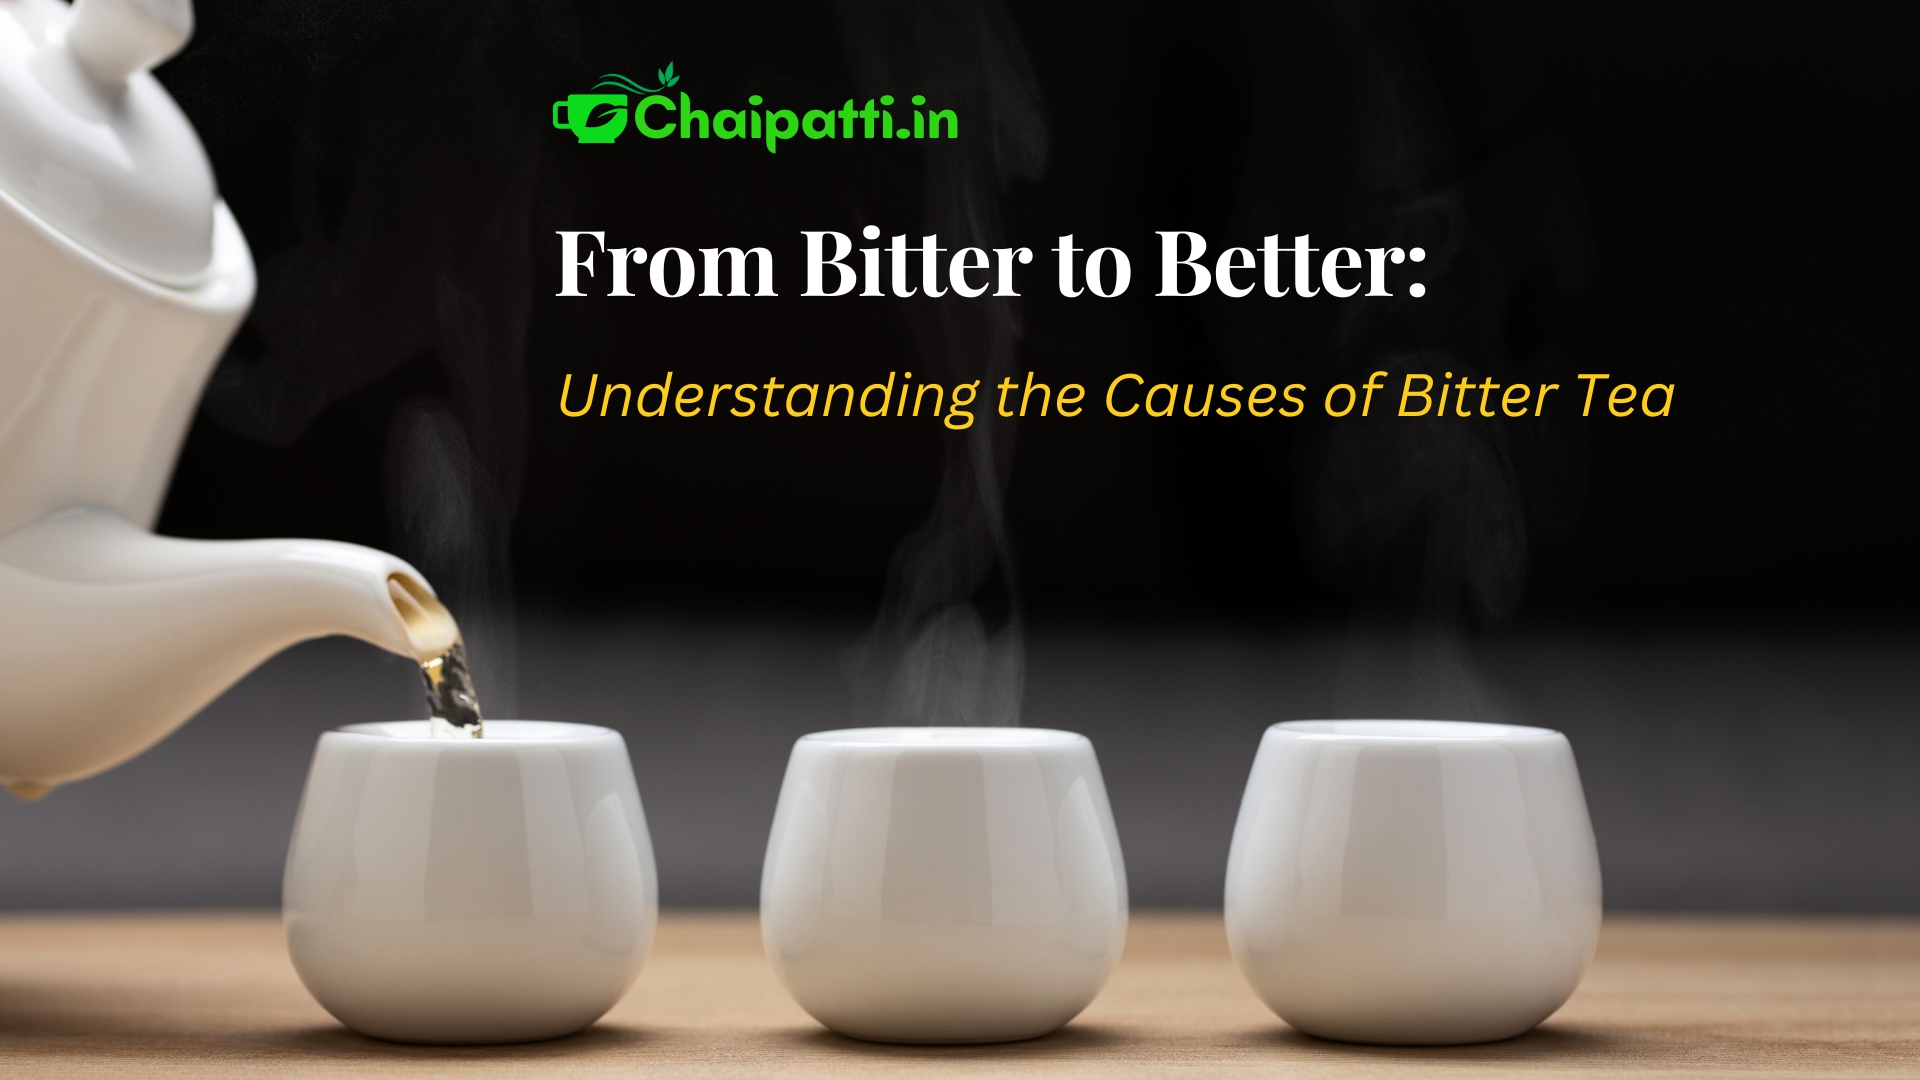 From Bitter to Better: Understanding the Causes of Bitter Tea